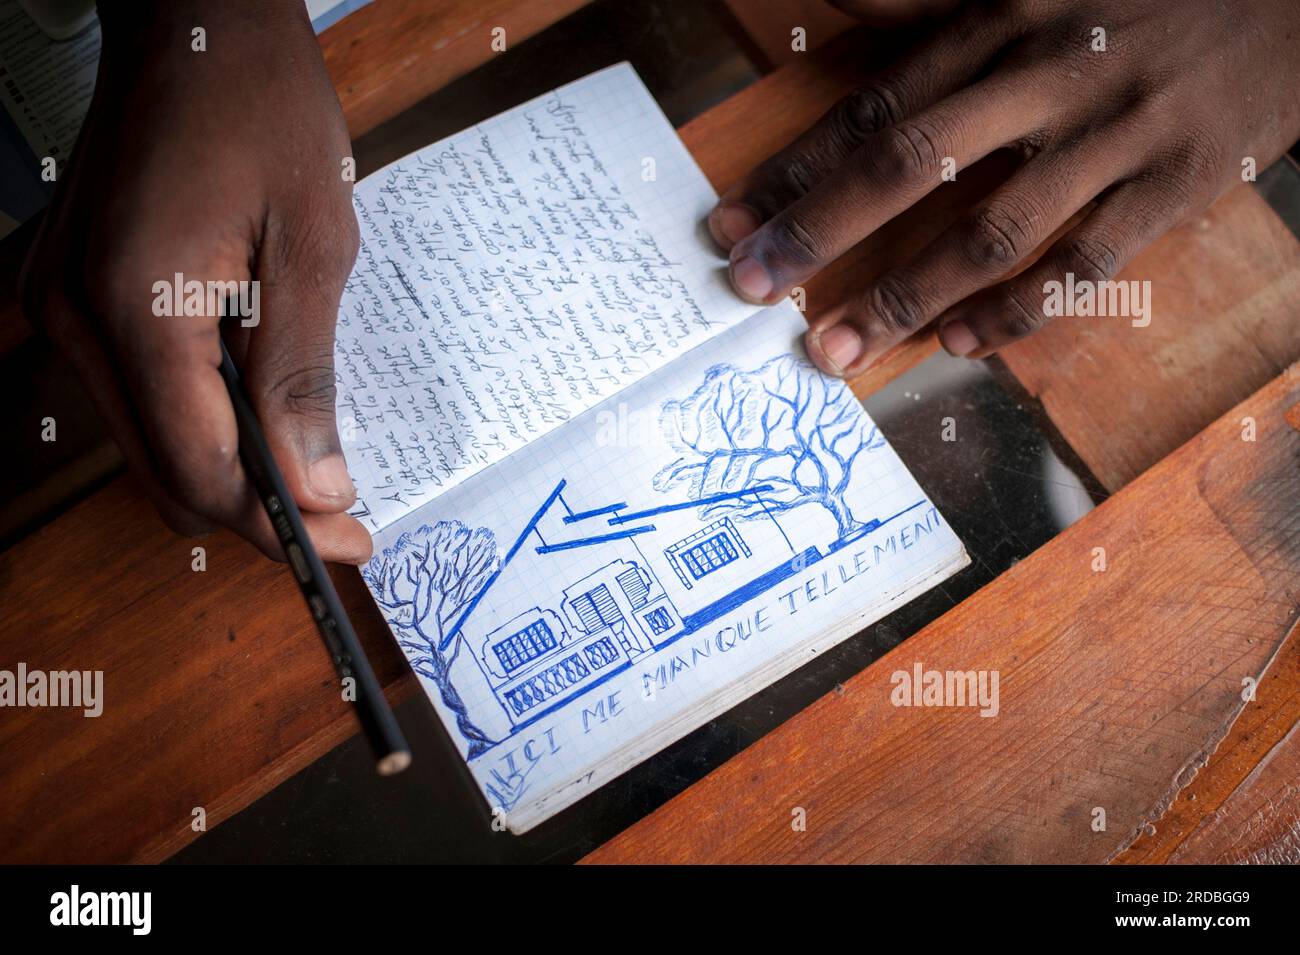 https://c8.alamy.com/comp/2RDBGG9/thats-my-home-in-coyah-says-amdi-as-he-shows-a-notebook-full-of-words-and-drawings-he-did-during-his-long-journey-irun-basque-country-september-4-2018-as-the-number-of-migrants-arriving-on-the-coasts-of-southern-spain-increased-more-and-more-migrants-are-heading-north-to-the-border-city-of-irun-to-try-to-cross-the-border-with-france-and-continue-on-their-way-french-authorities-have-reacted-by-placing-police-controls-at-all-borders-and-causing-many-migrants-to-seek-alternative-route-and-methods-to-cross-the-border-and-to-continue-their-journey-to-other-european-countries-in-irun-t-2RDBGG9.jpg